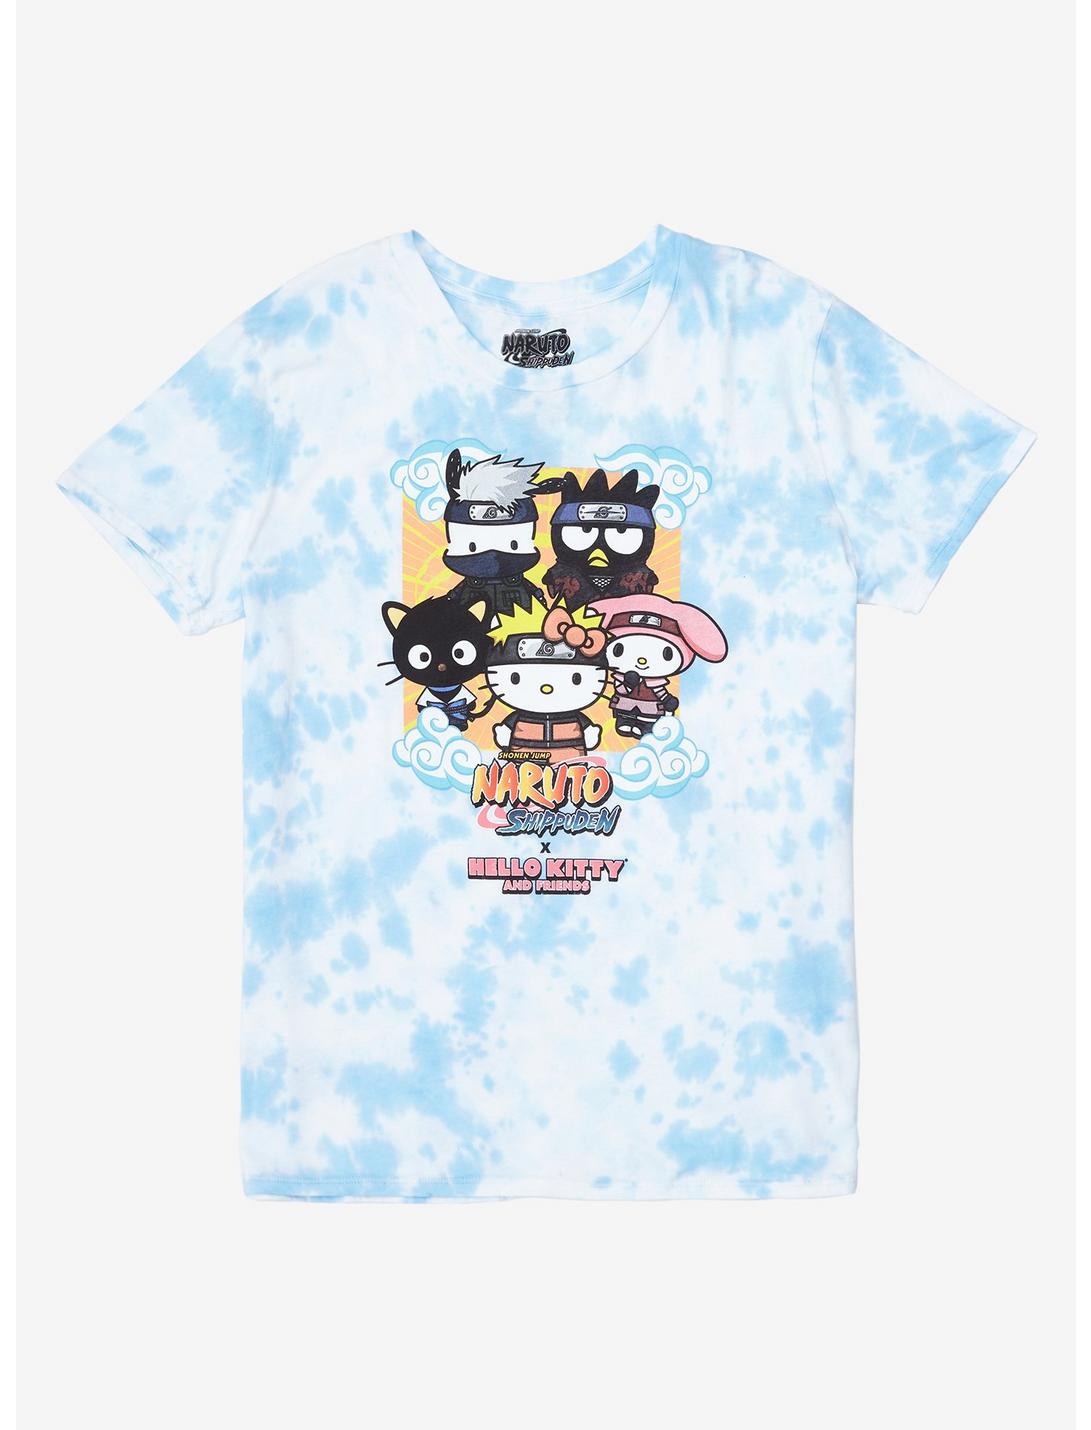 Naruto Shippuden X Hello Kitty And Friends Group Tie-Dye Girls T-Shirt Plus Size, MULTI, hi-res